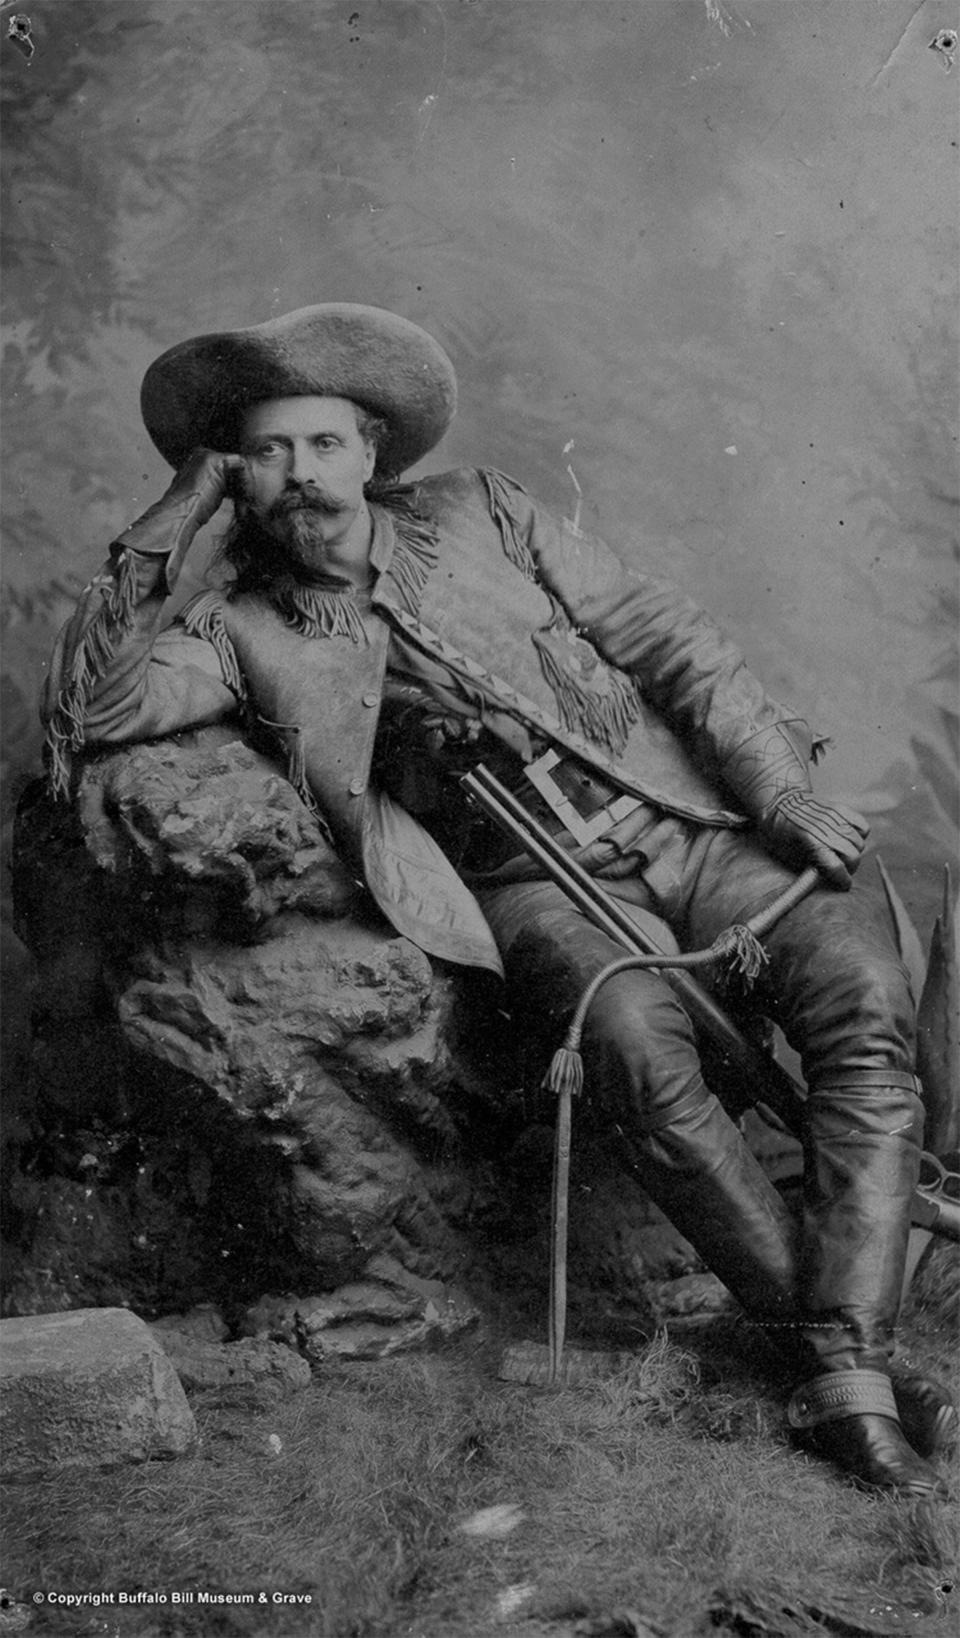 Were it not for the showmanship of W.F. “Buffalo Bill” Cody and his world-famous Wild West show, the Pony Express would be largely forgotten today. This photo was taken n London in 1887 on the Wild West's first trip to Europe. Buffalo Bill Museum and Grave.